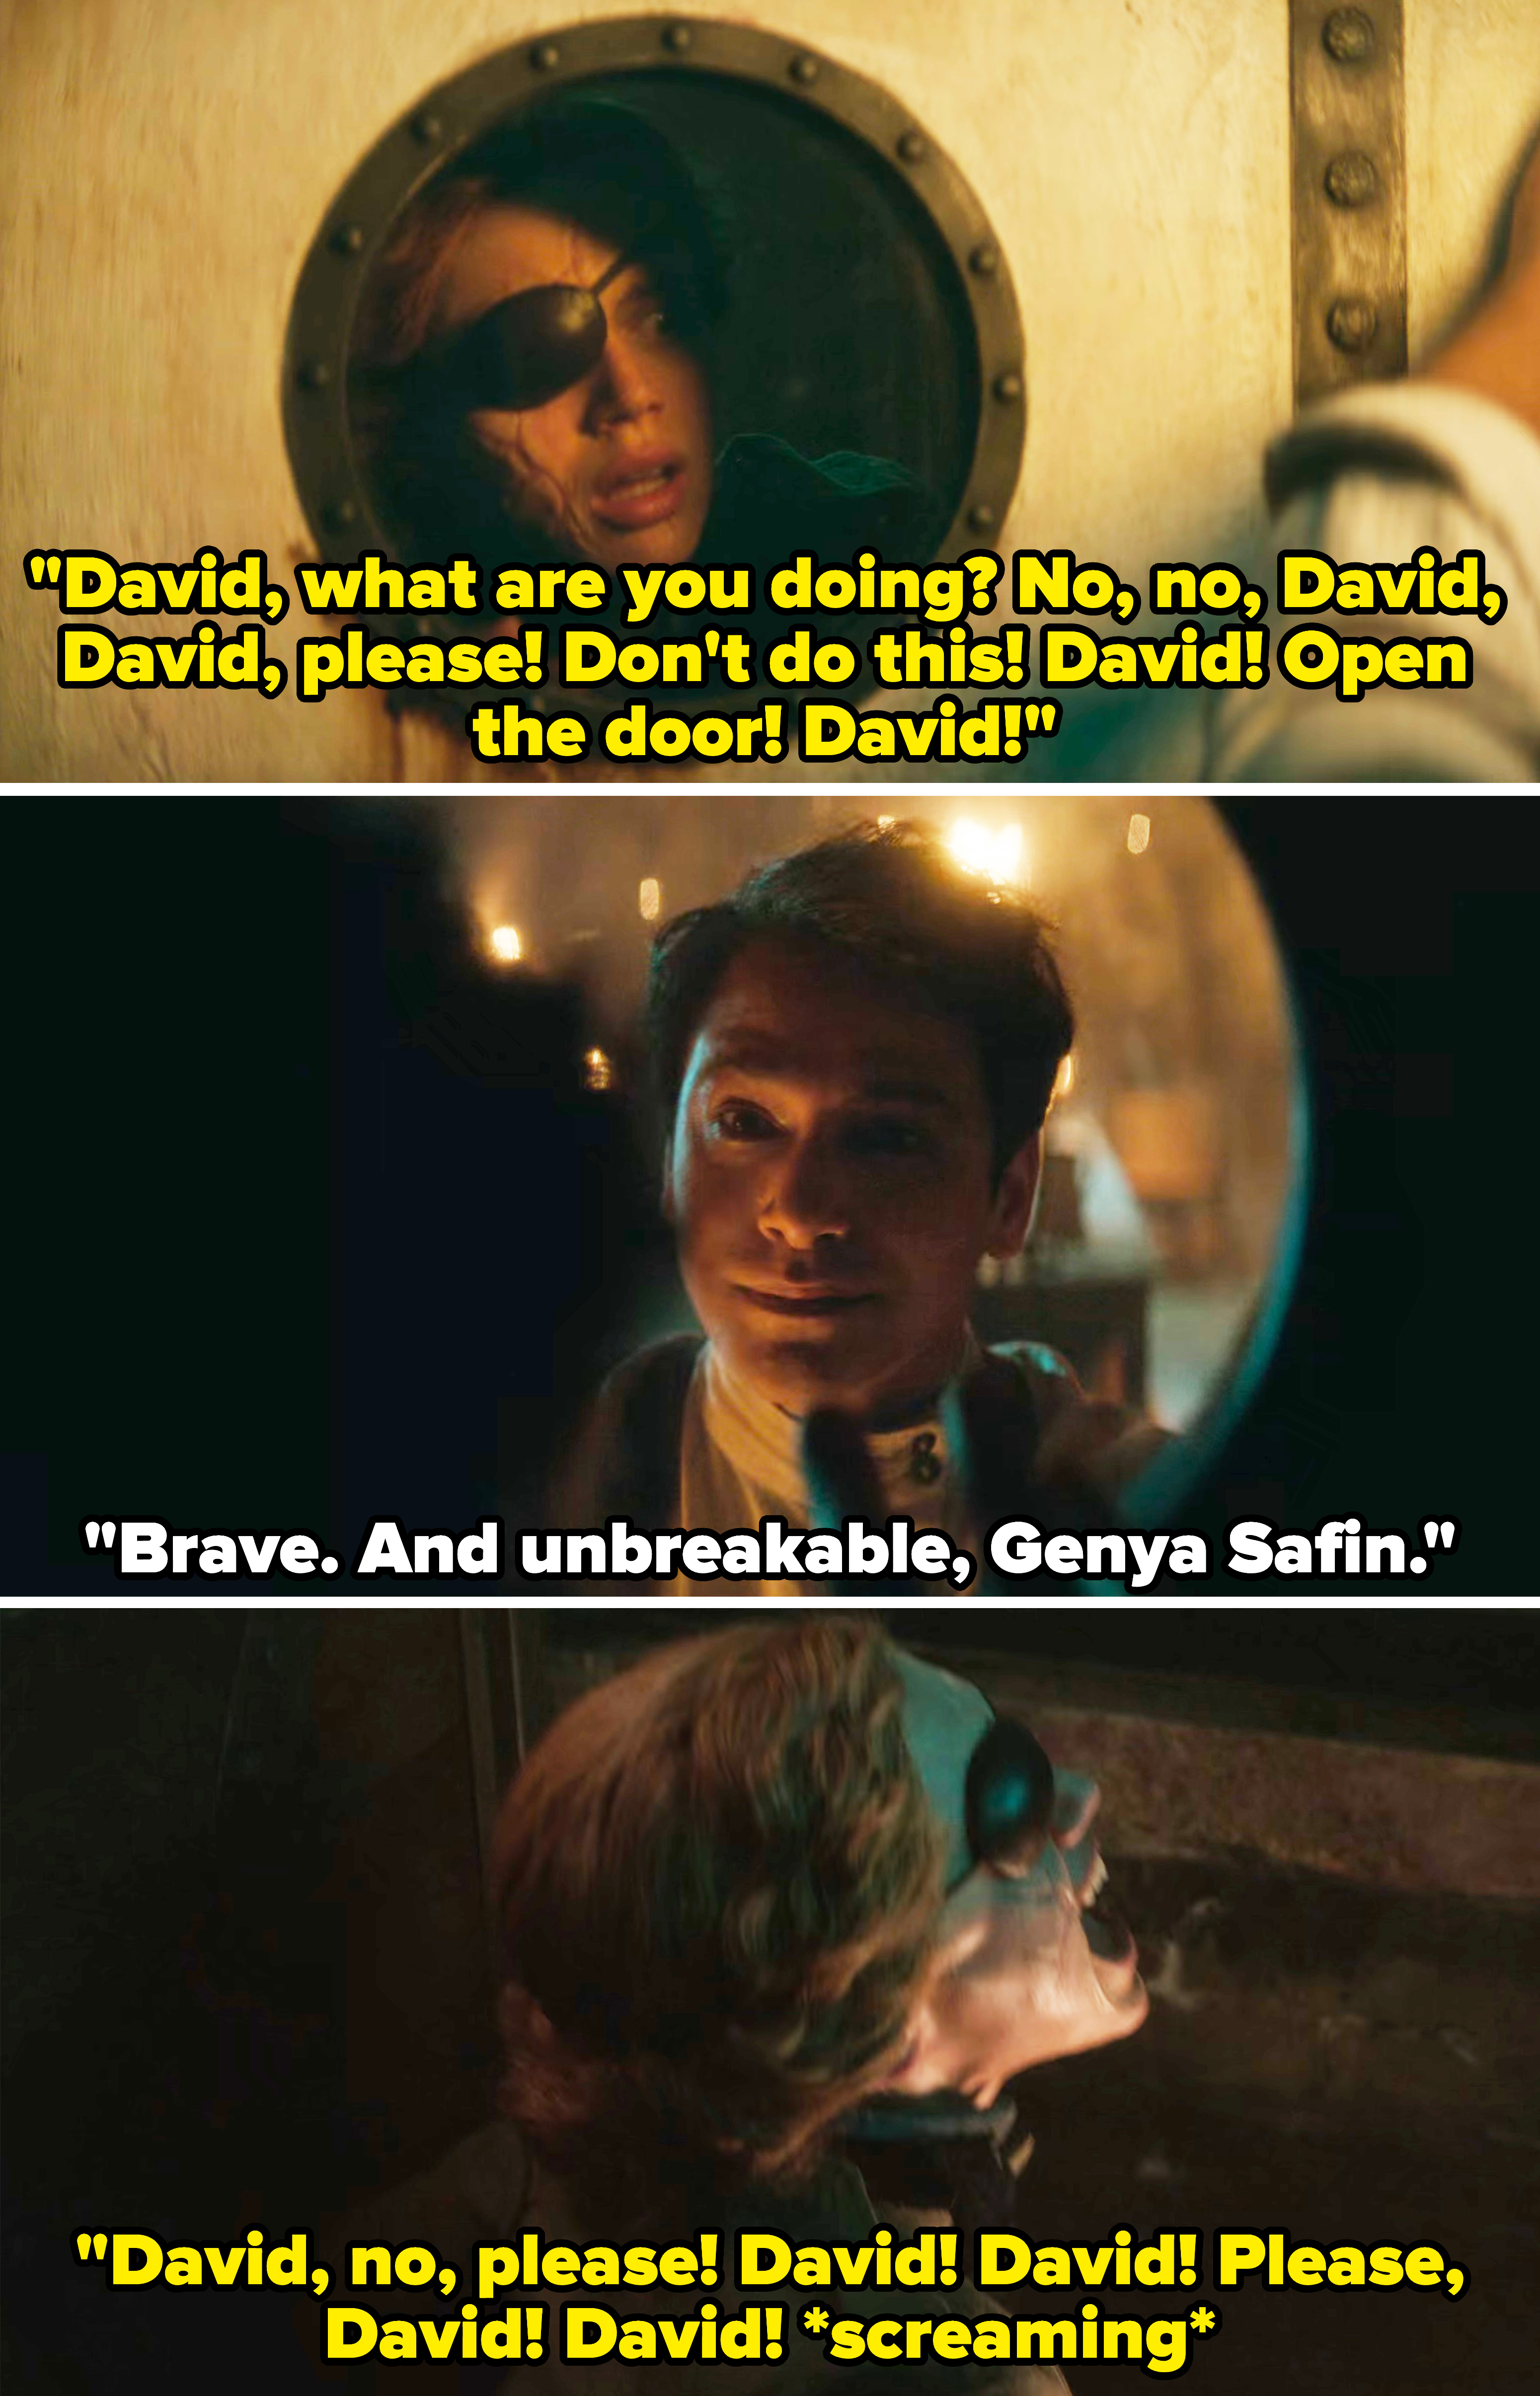 Genya says, &quot;David, what are you doing? No, no, David, David, please! Don&#x27;t do this! David! Open the door! David!&quot; And David says, &quot;Brave, and unbreakable, Genya Safin&quot;